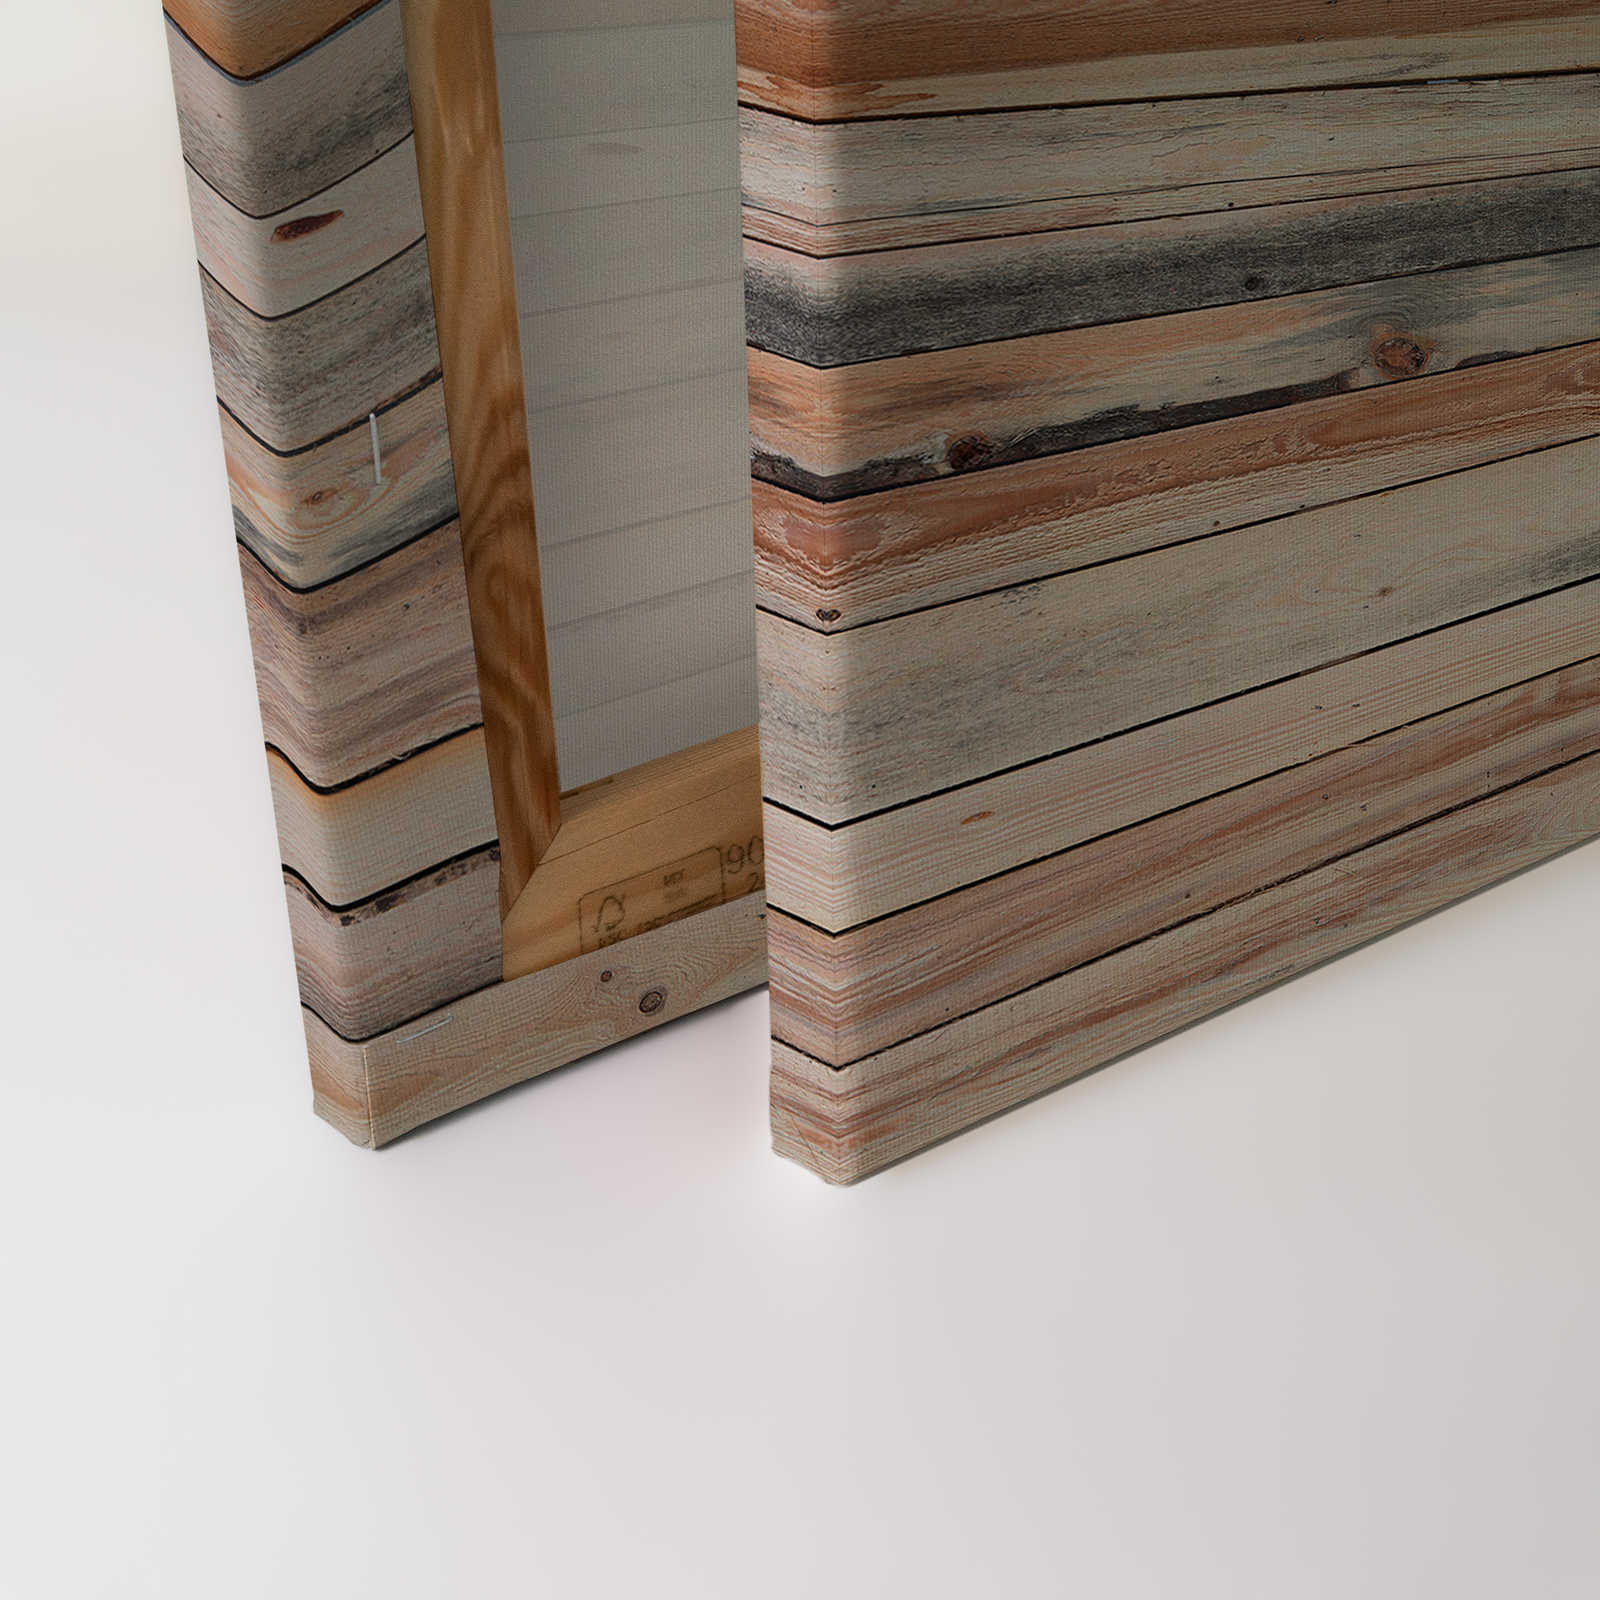             Weathered planks - canvas picture in used look as a highlight for the wall - 0.90 m x 0.60 m
        